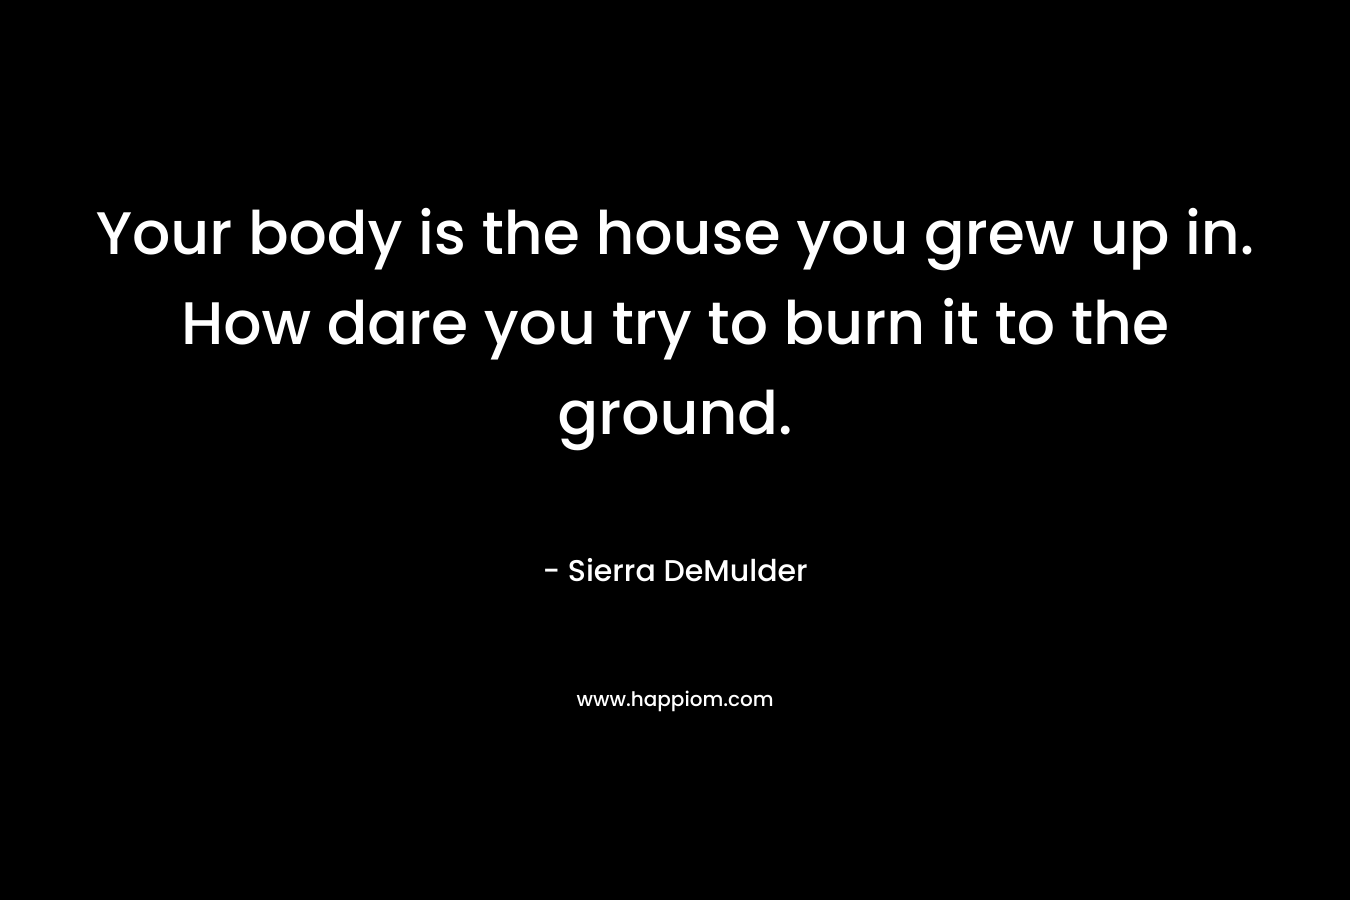 Your body is the house you grew up in. How dare you try to burn it to the ground. – Sierra DeMulder